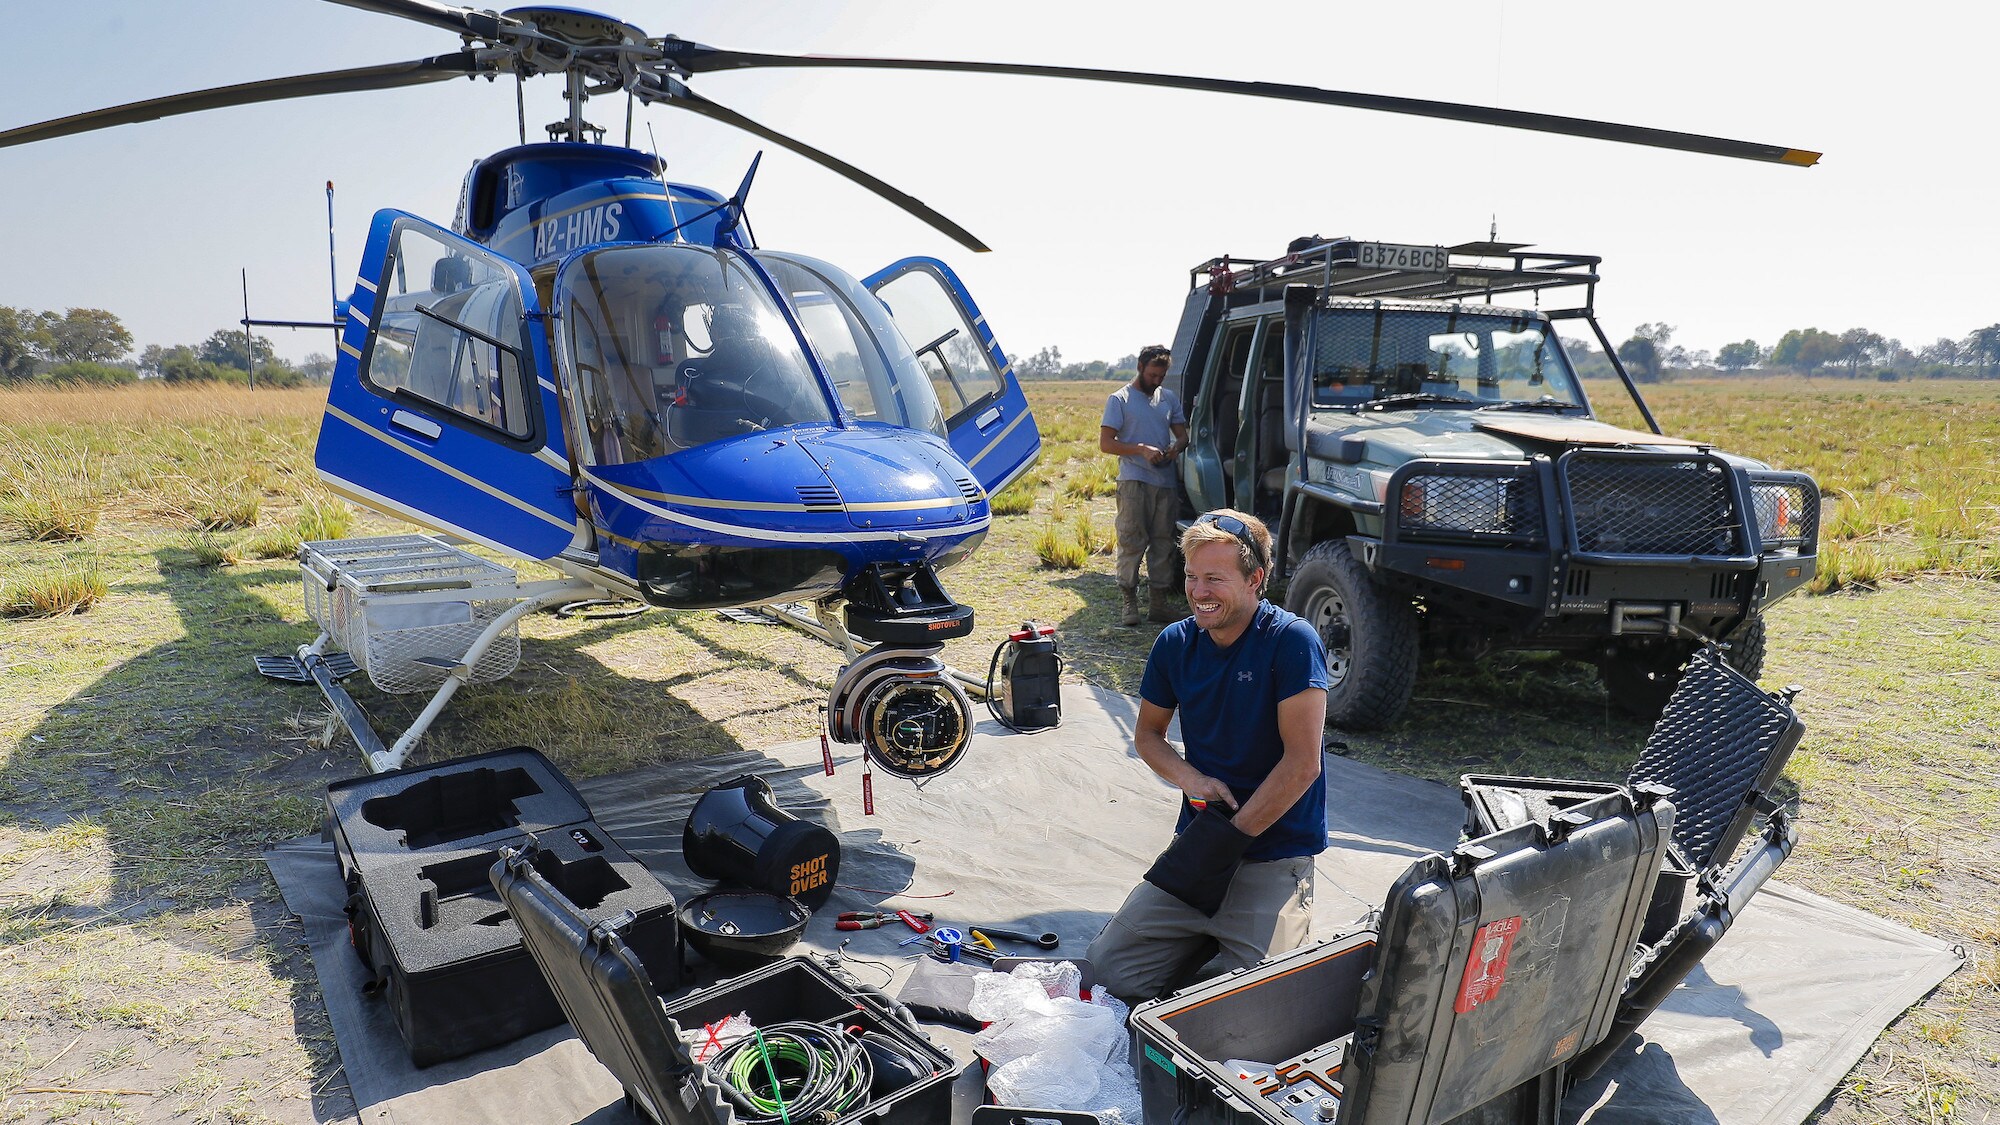 Bertie Gregory kneeling amongst cases, setting up the M1 Shotover on to the front of the helicopter. (National Geographic for Disney+/Anna Dimitriadis)